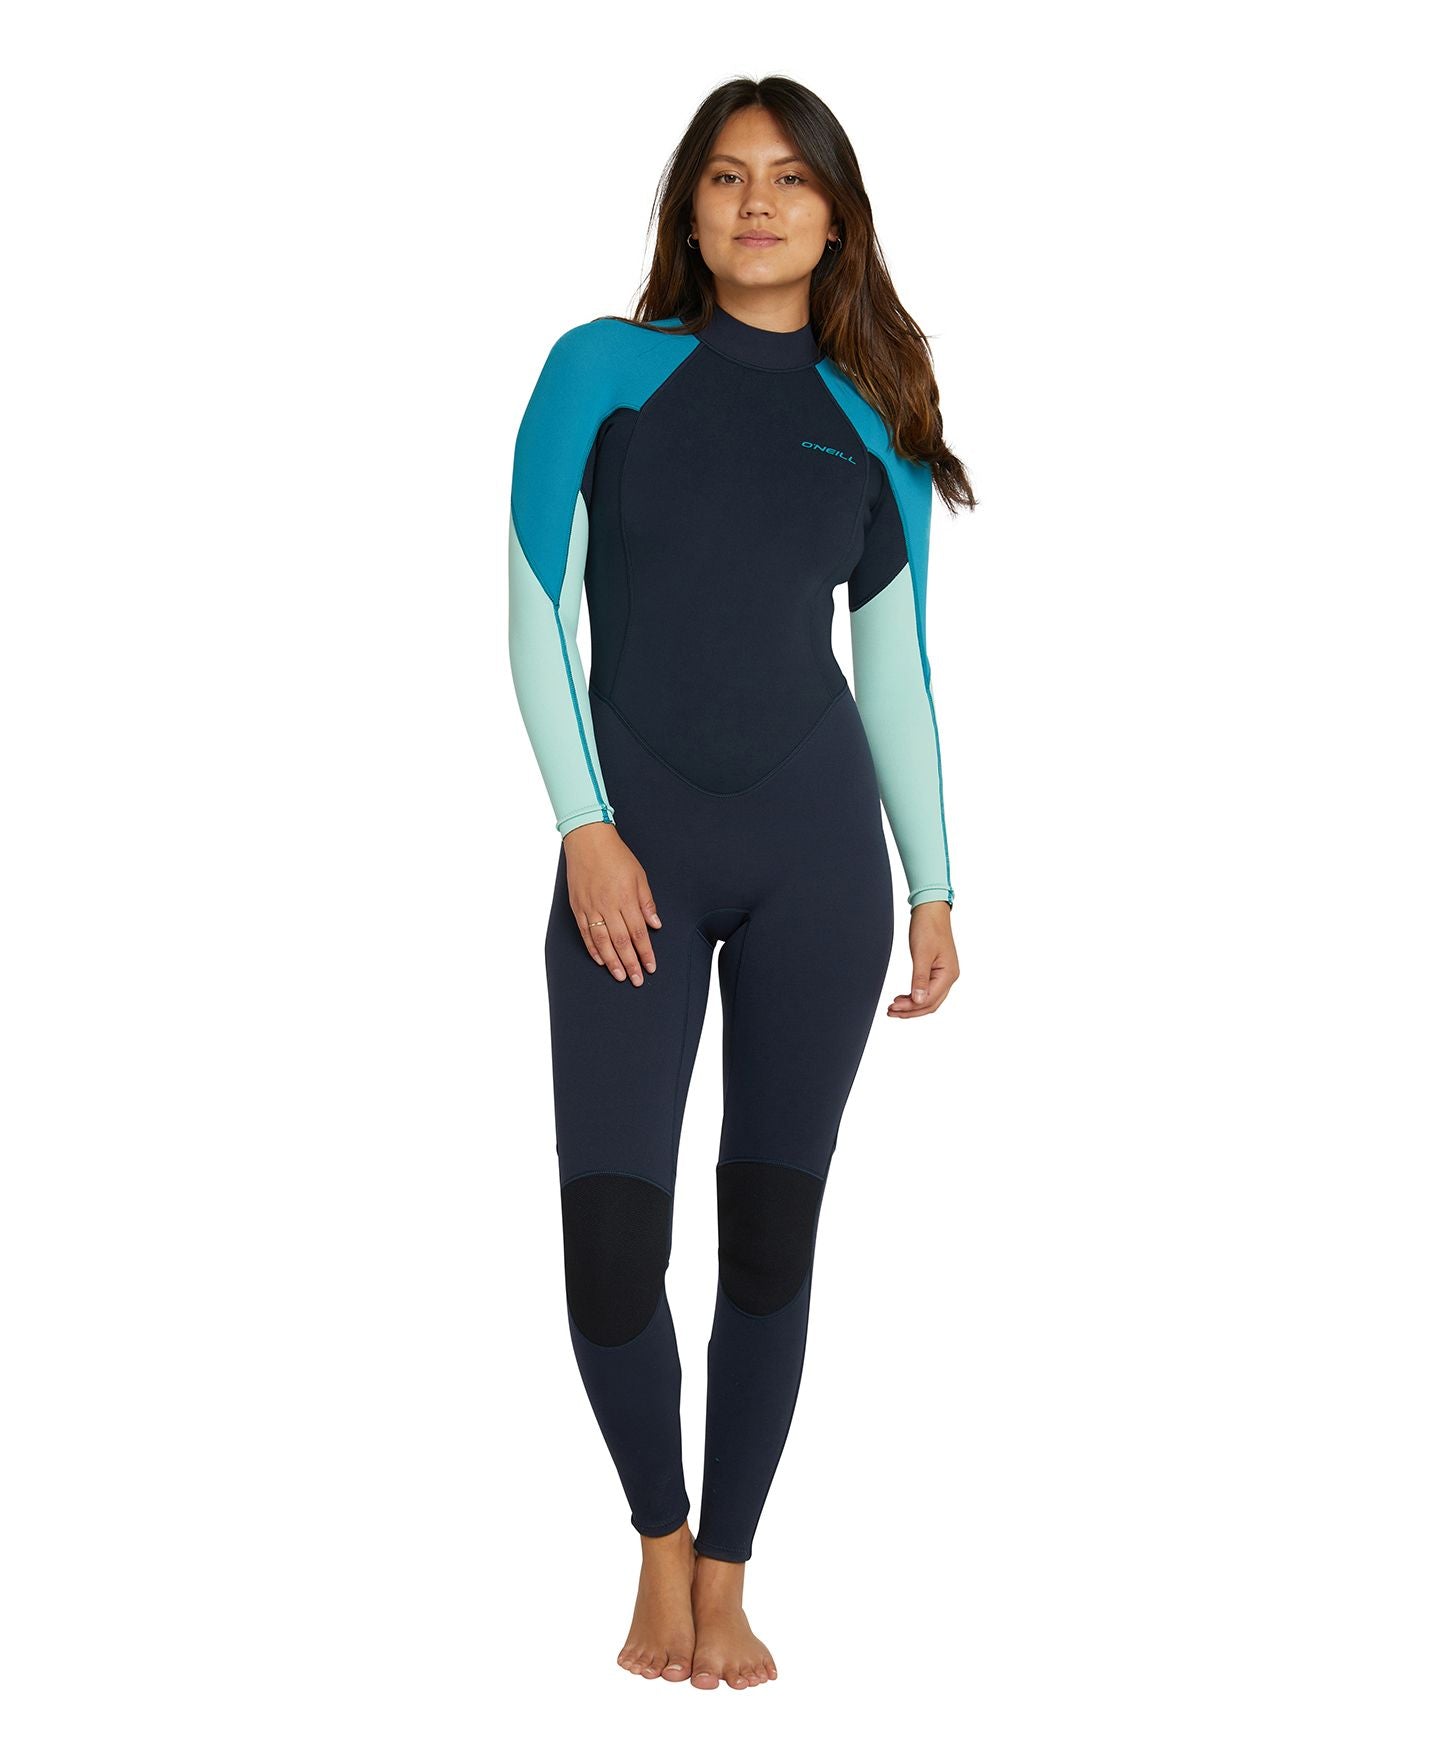 ONeill Reactor 3/2 Womens Steamer - Aby/Mrco/Lagn